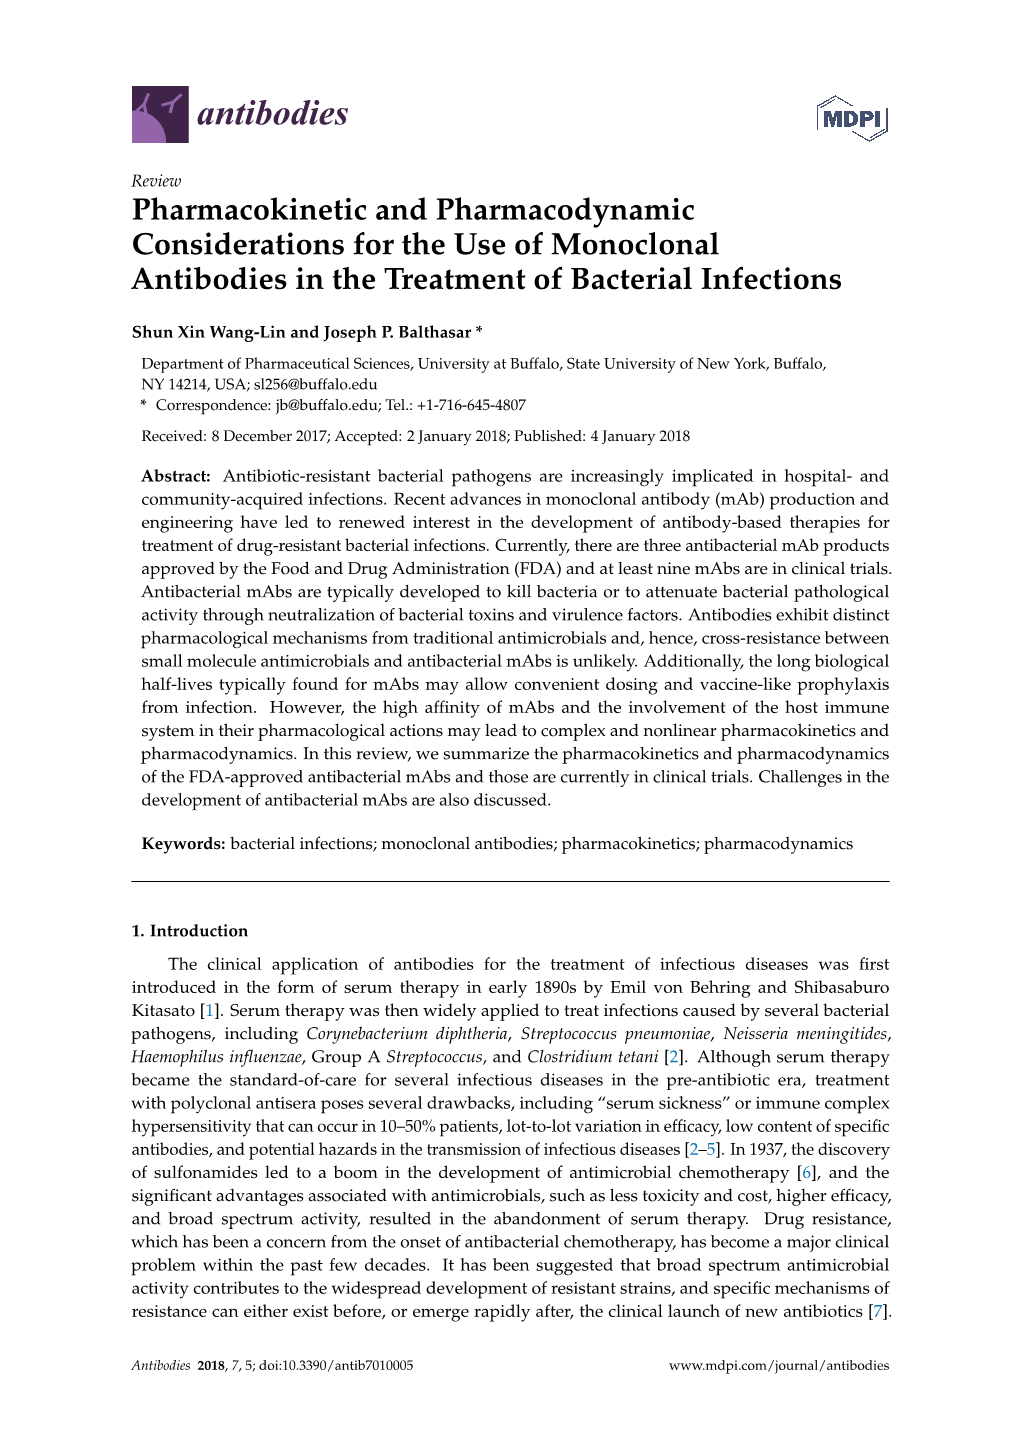 Pharmacokinetic and Pharmacodynamic Considerations for the Use of Monoclonal Antibodies in the Treatment of Bacterial Infections